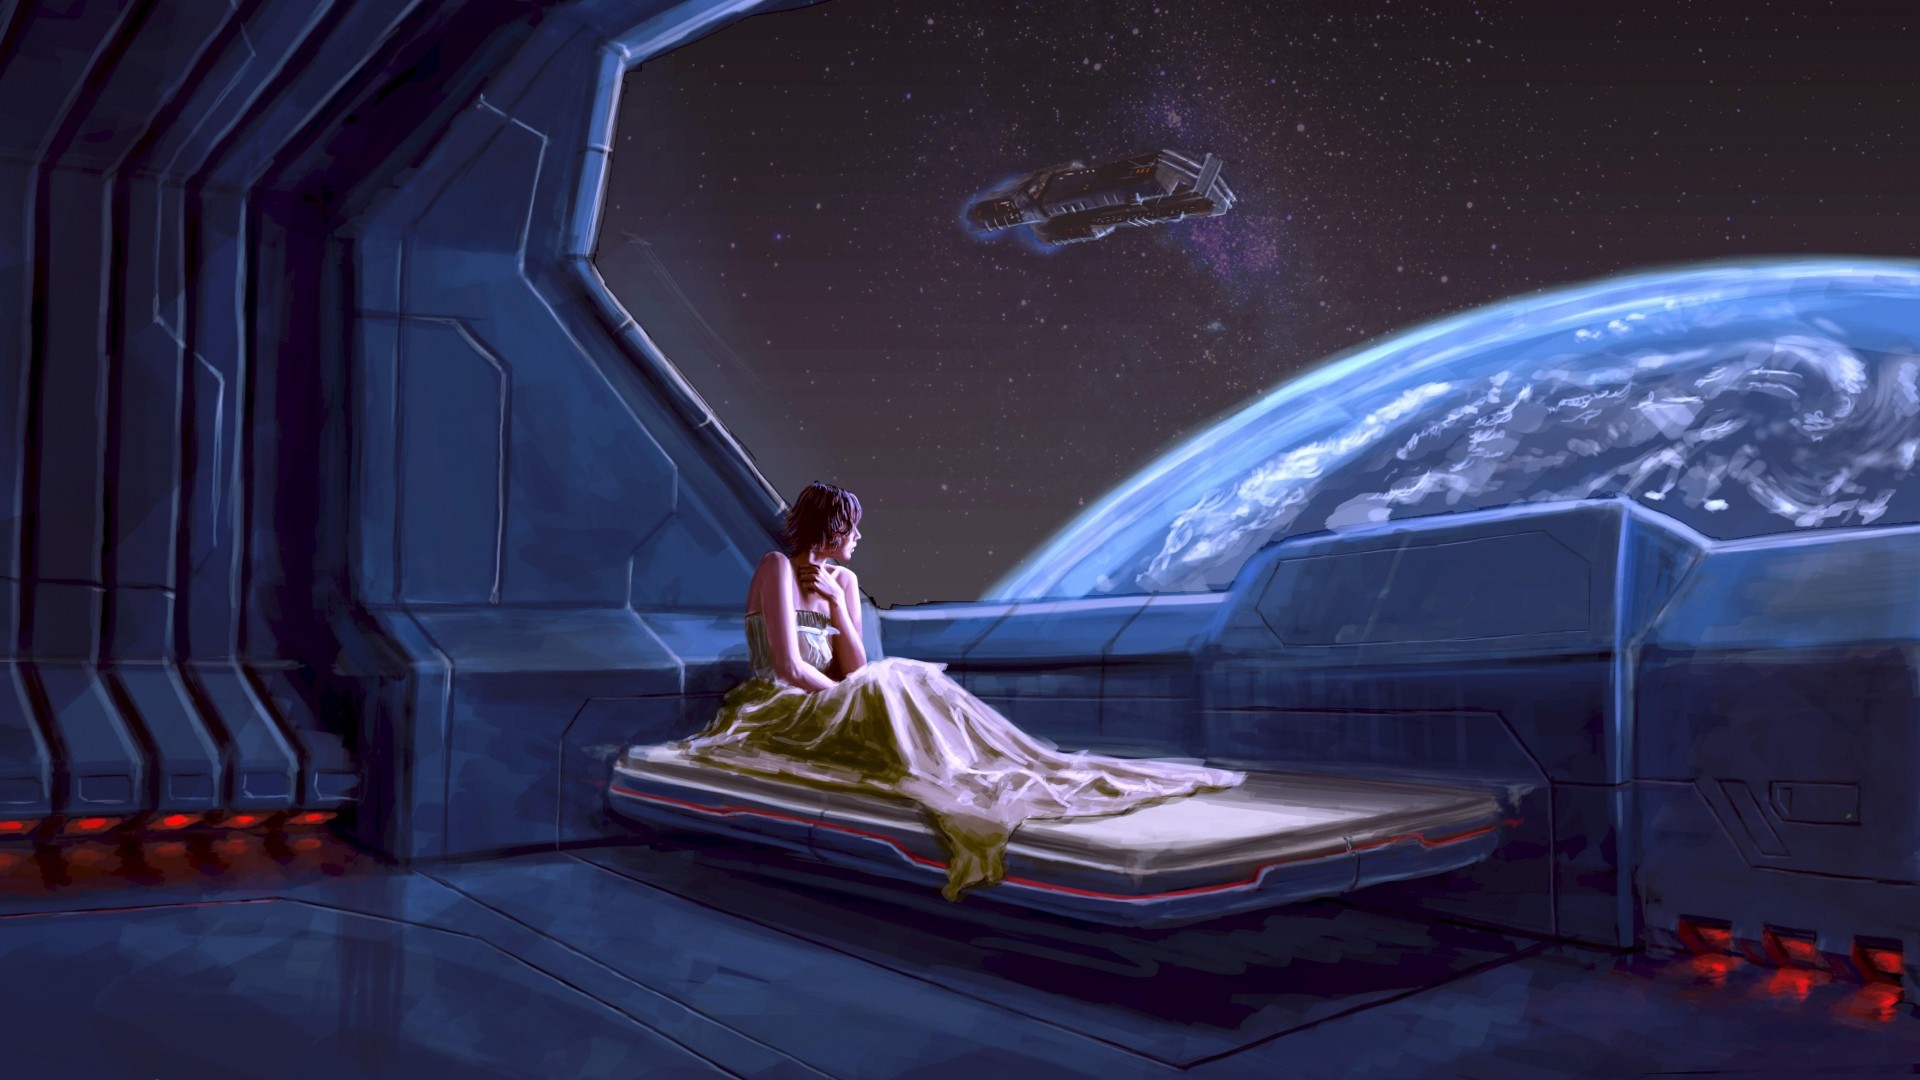 women, Bed, Galaxy, Space, Earth, Spaceship Wallpaper